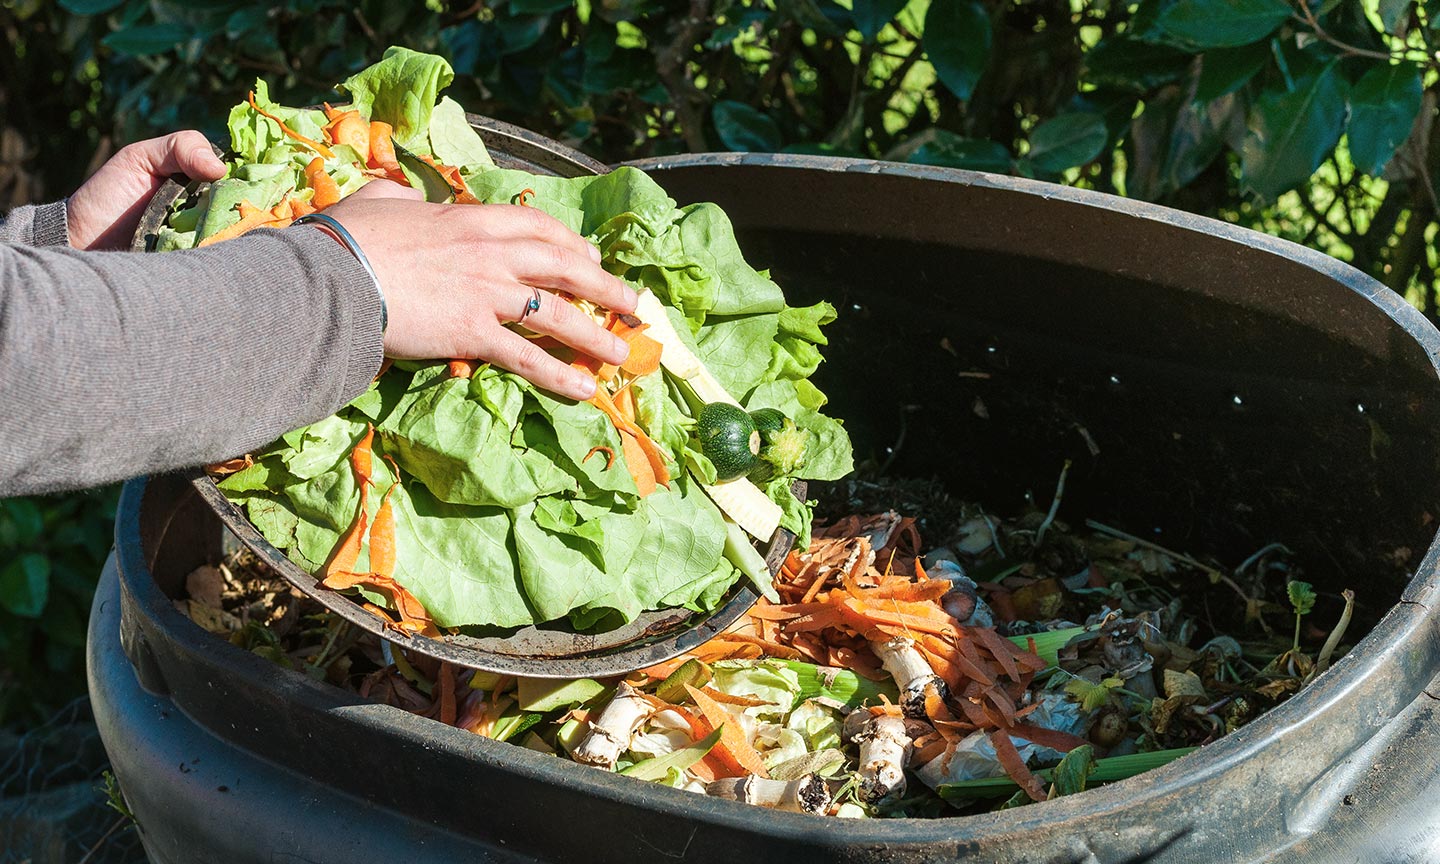 A container of vegetable scraps being added to a compost bin